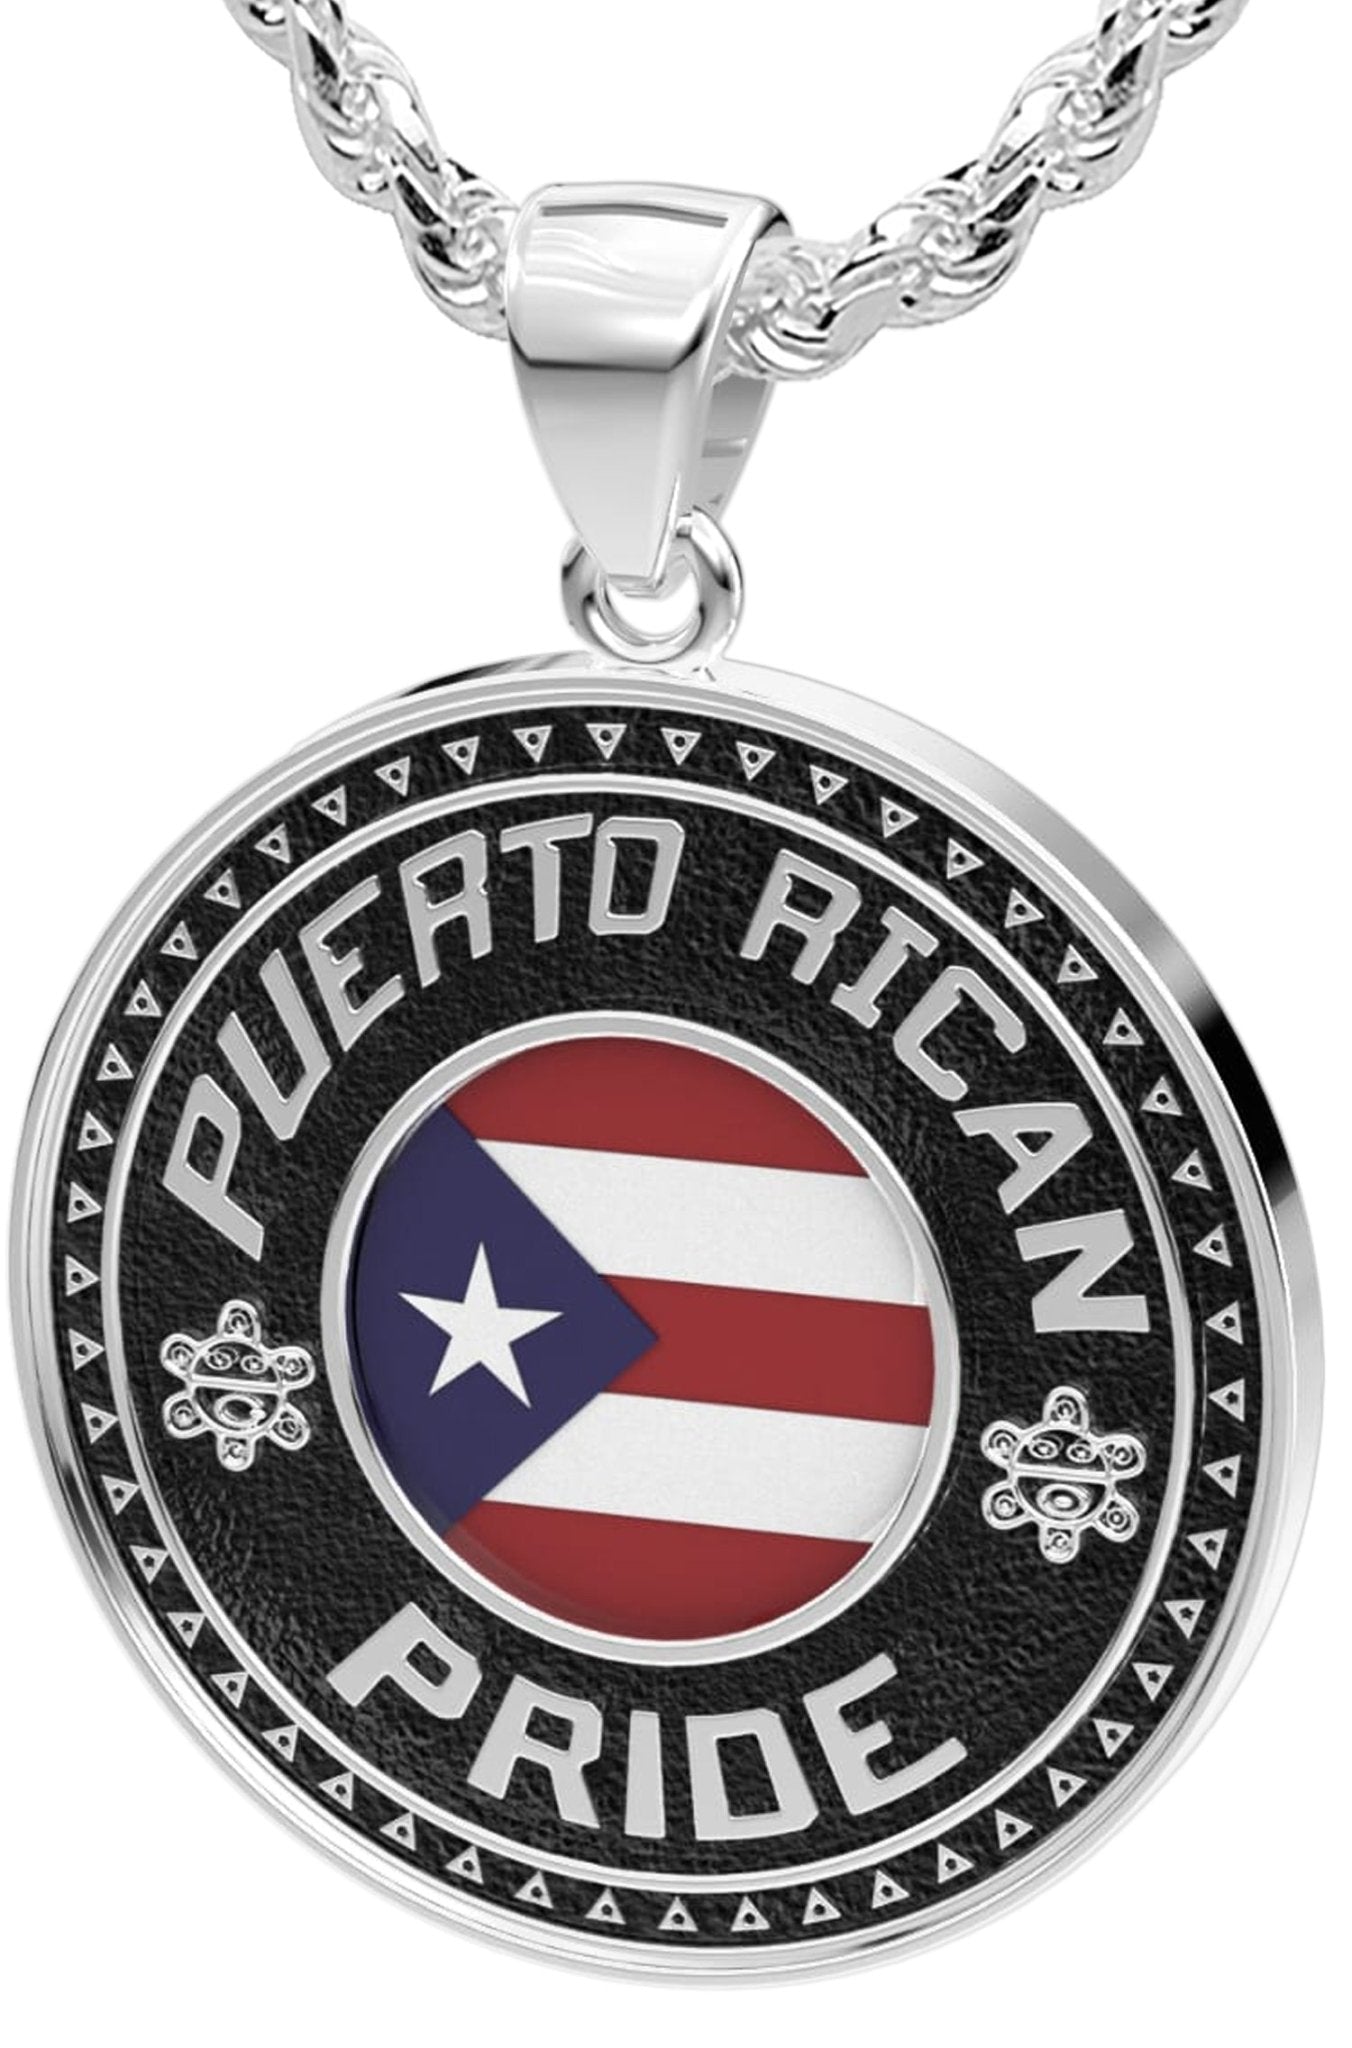 mens 925 sterling silver puerto rican pride medal pendant necklace with flag 33mm 385274